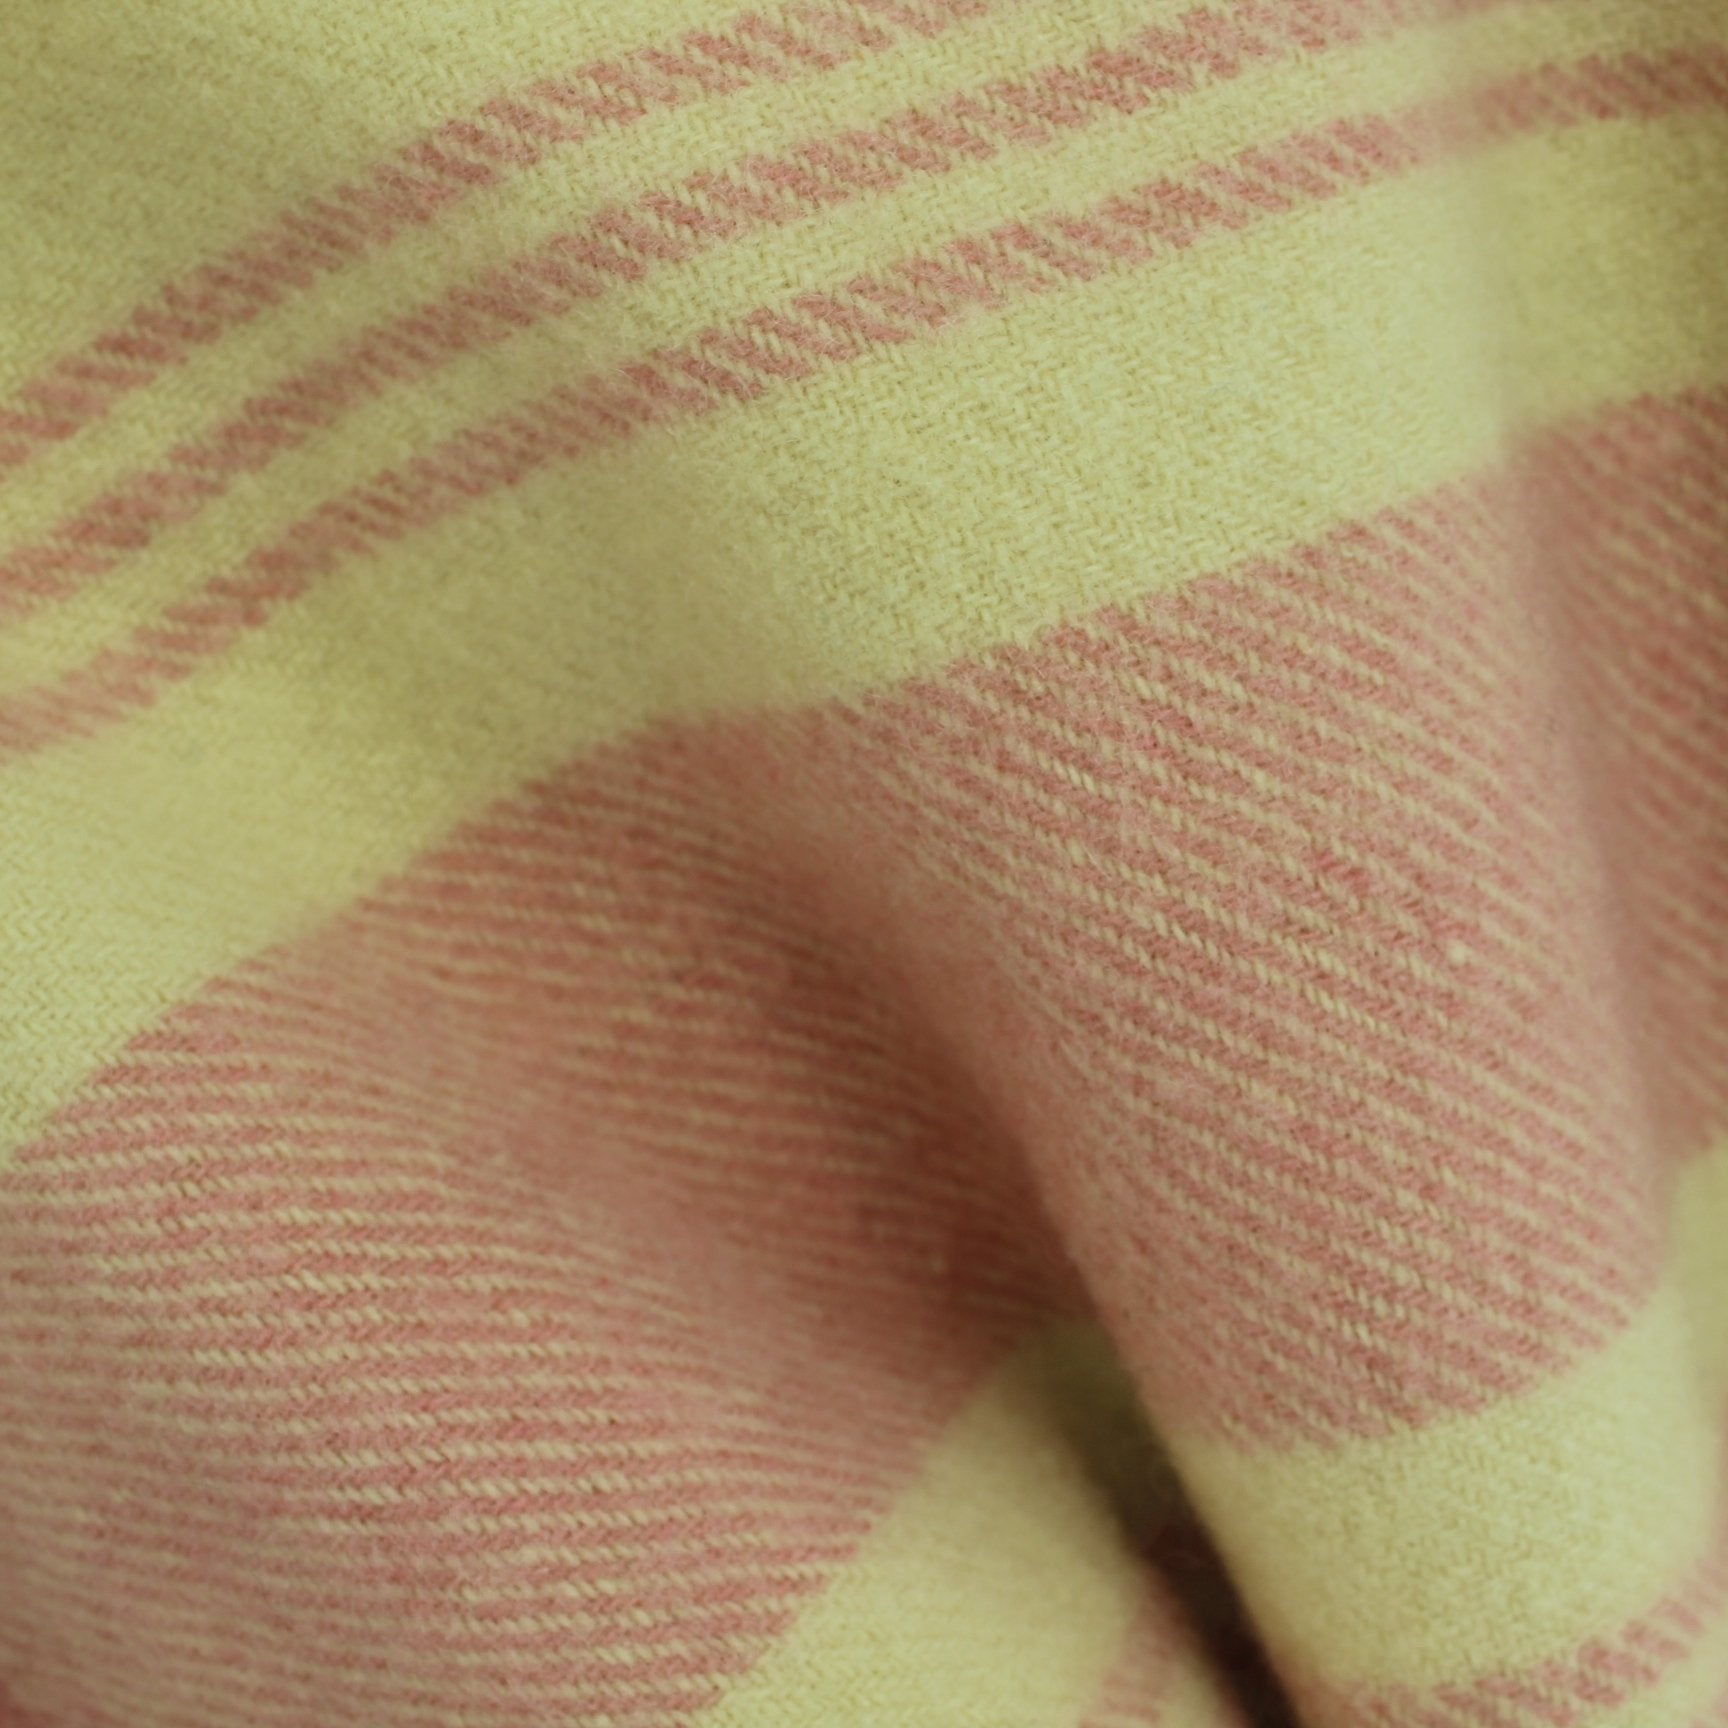 All Seasons Light Medium Cabin Style Wool Blanket Cream Pink Stripes Late 1940s very close view of wool surface